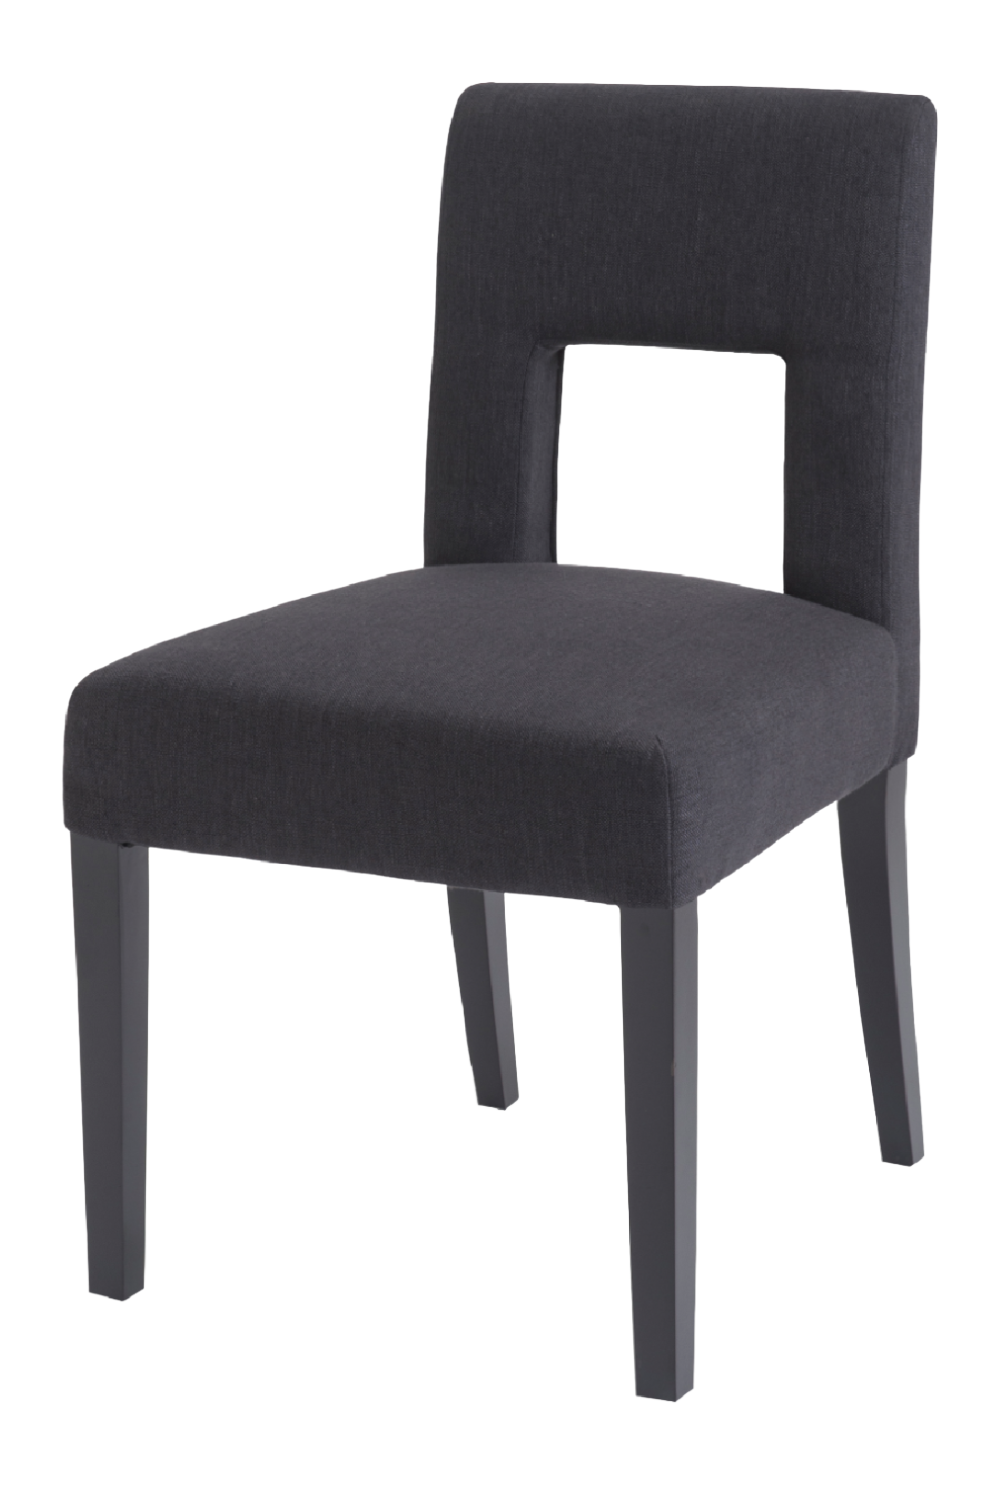 Gray Upholstered Dining Chair | Liang & Eimil Venice | Oroa.com